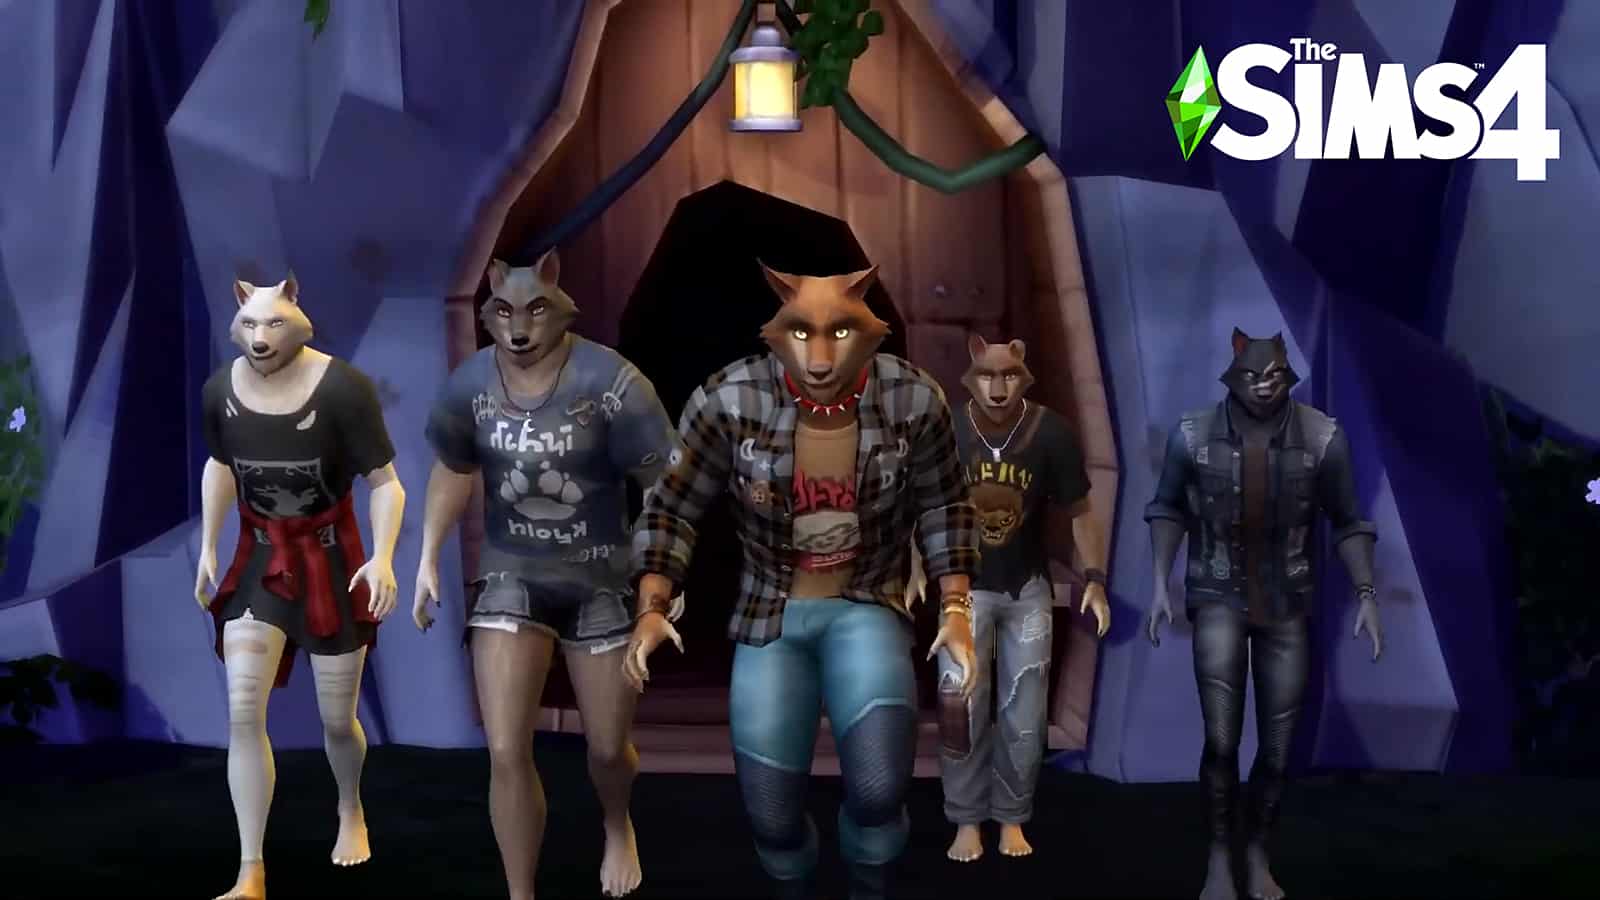 Werewolves in The Sims 4 Game Pack